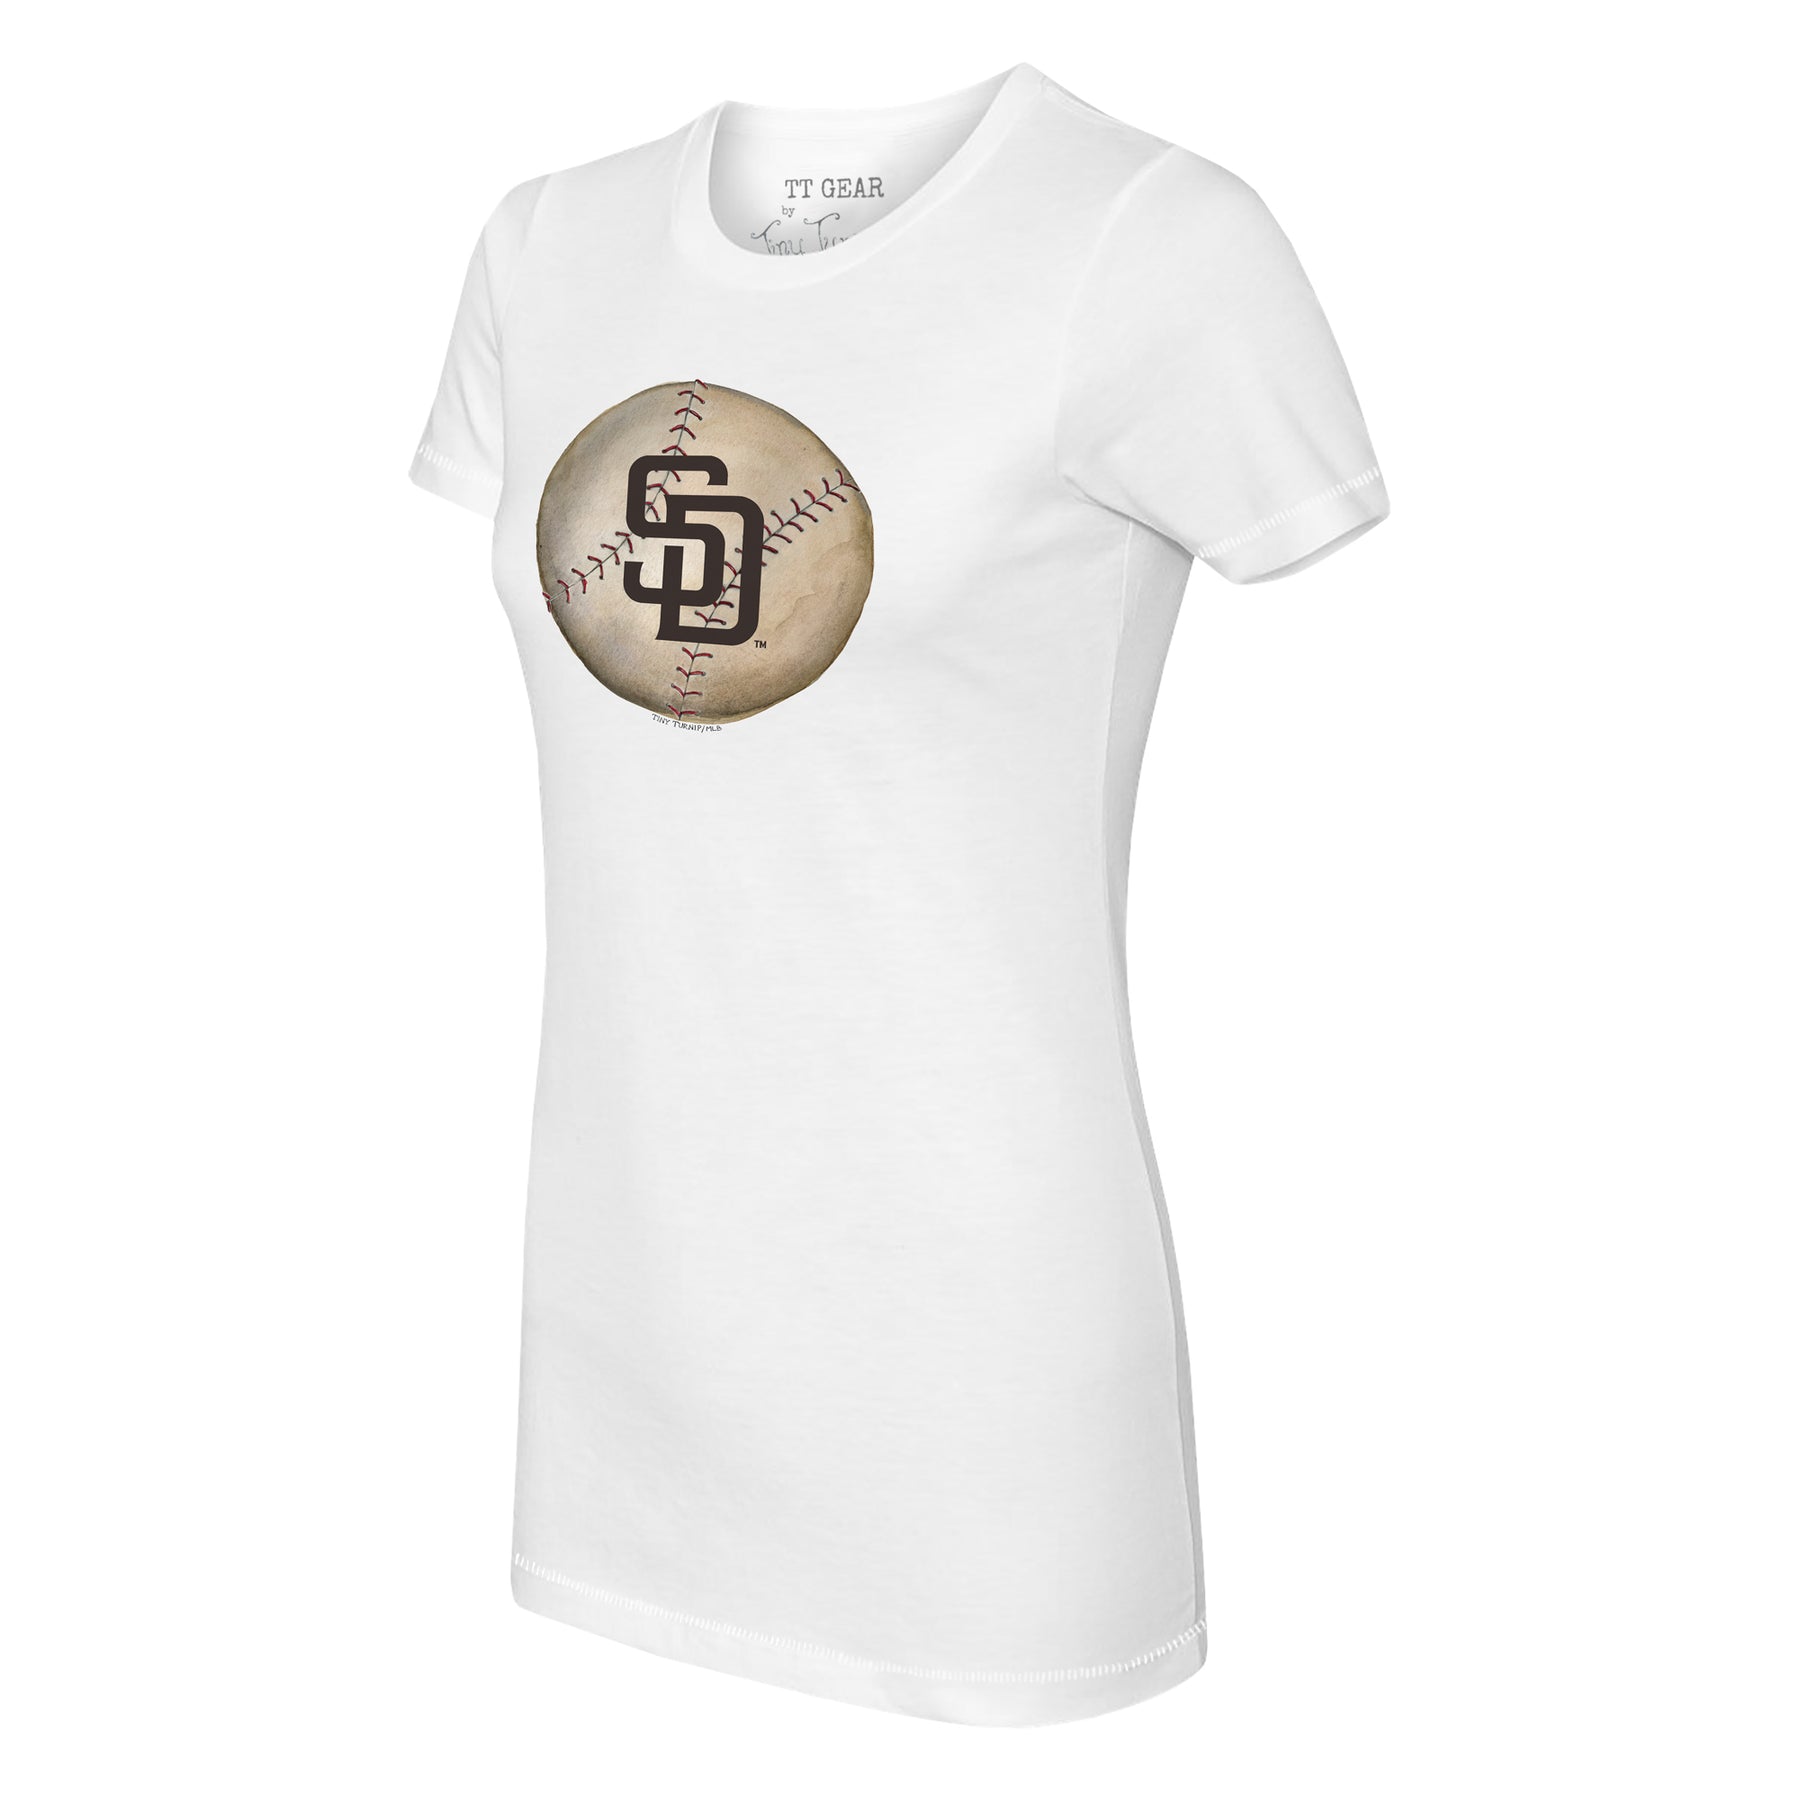 San Diego Padres Women's Small Jersey for Sale in San Diego, CA